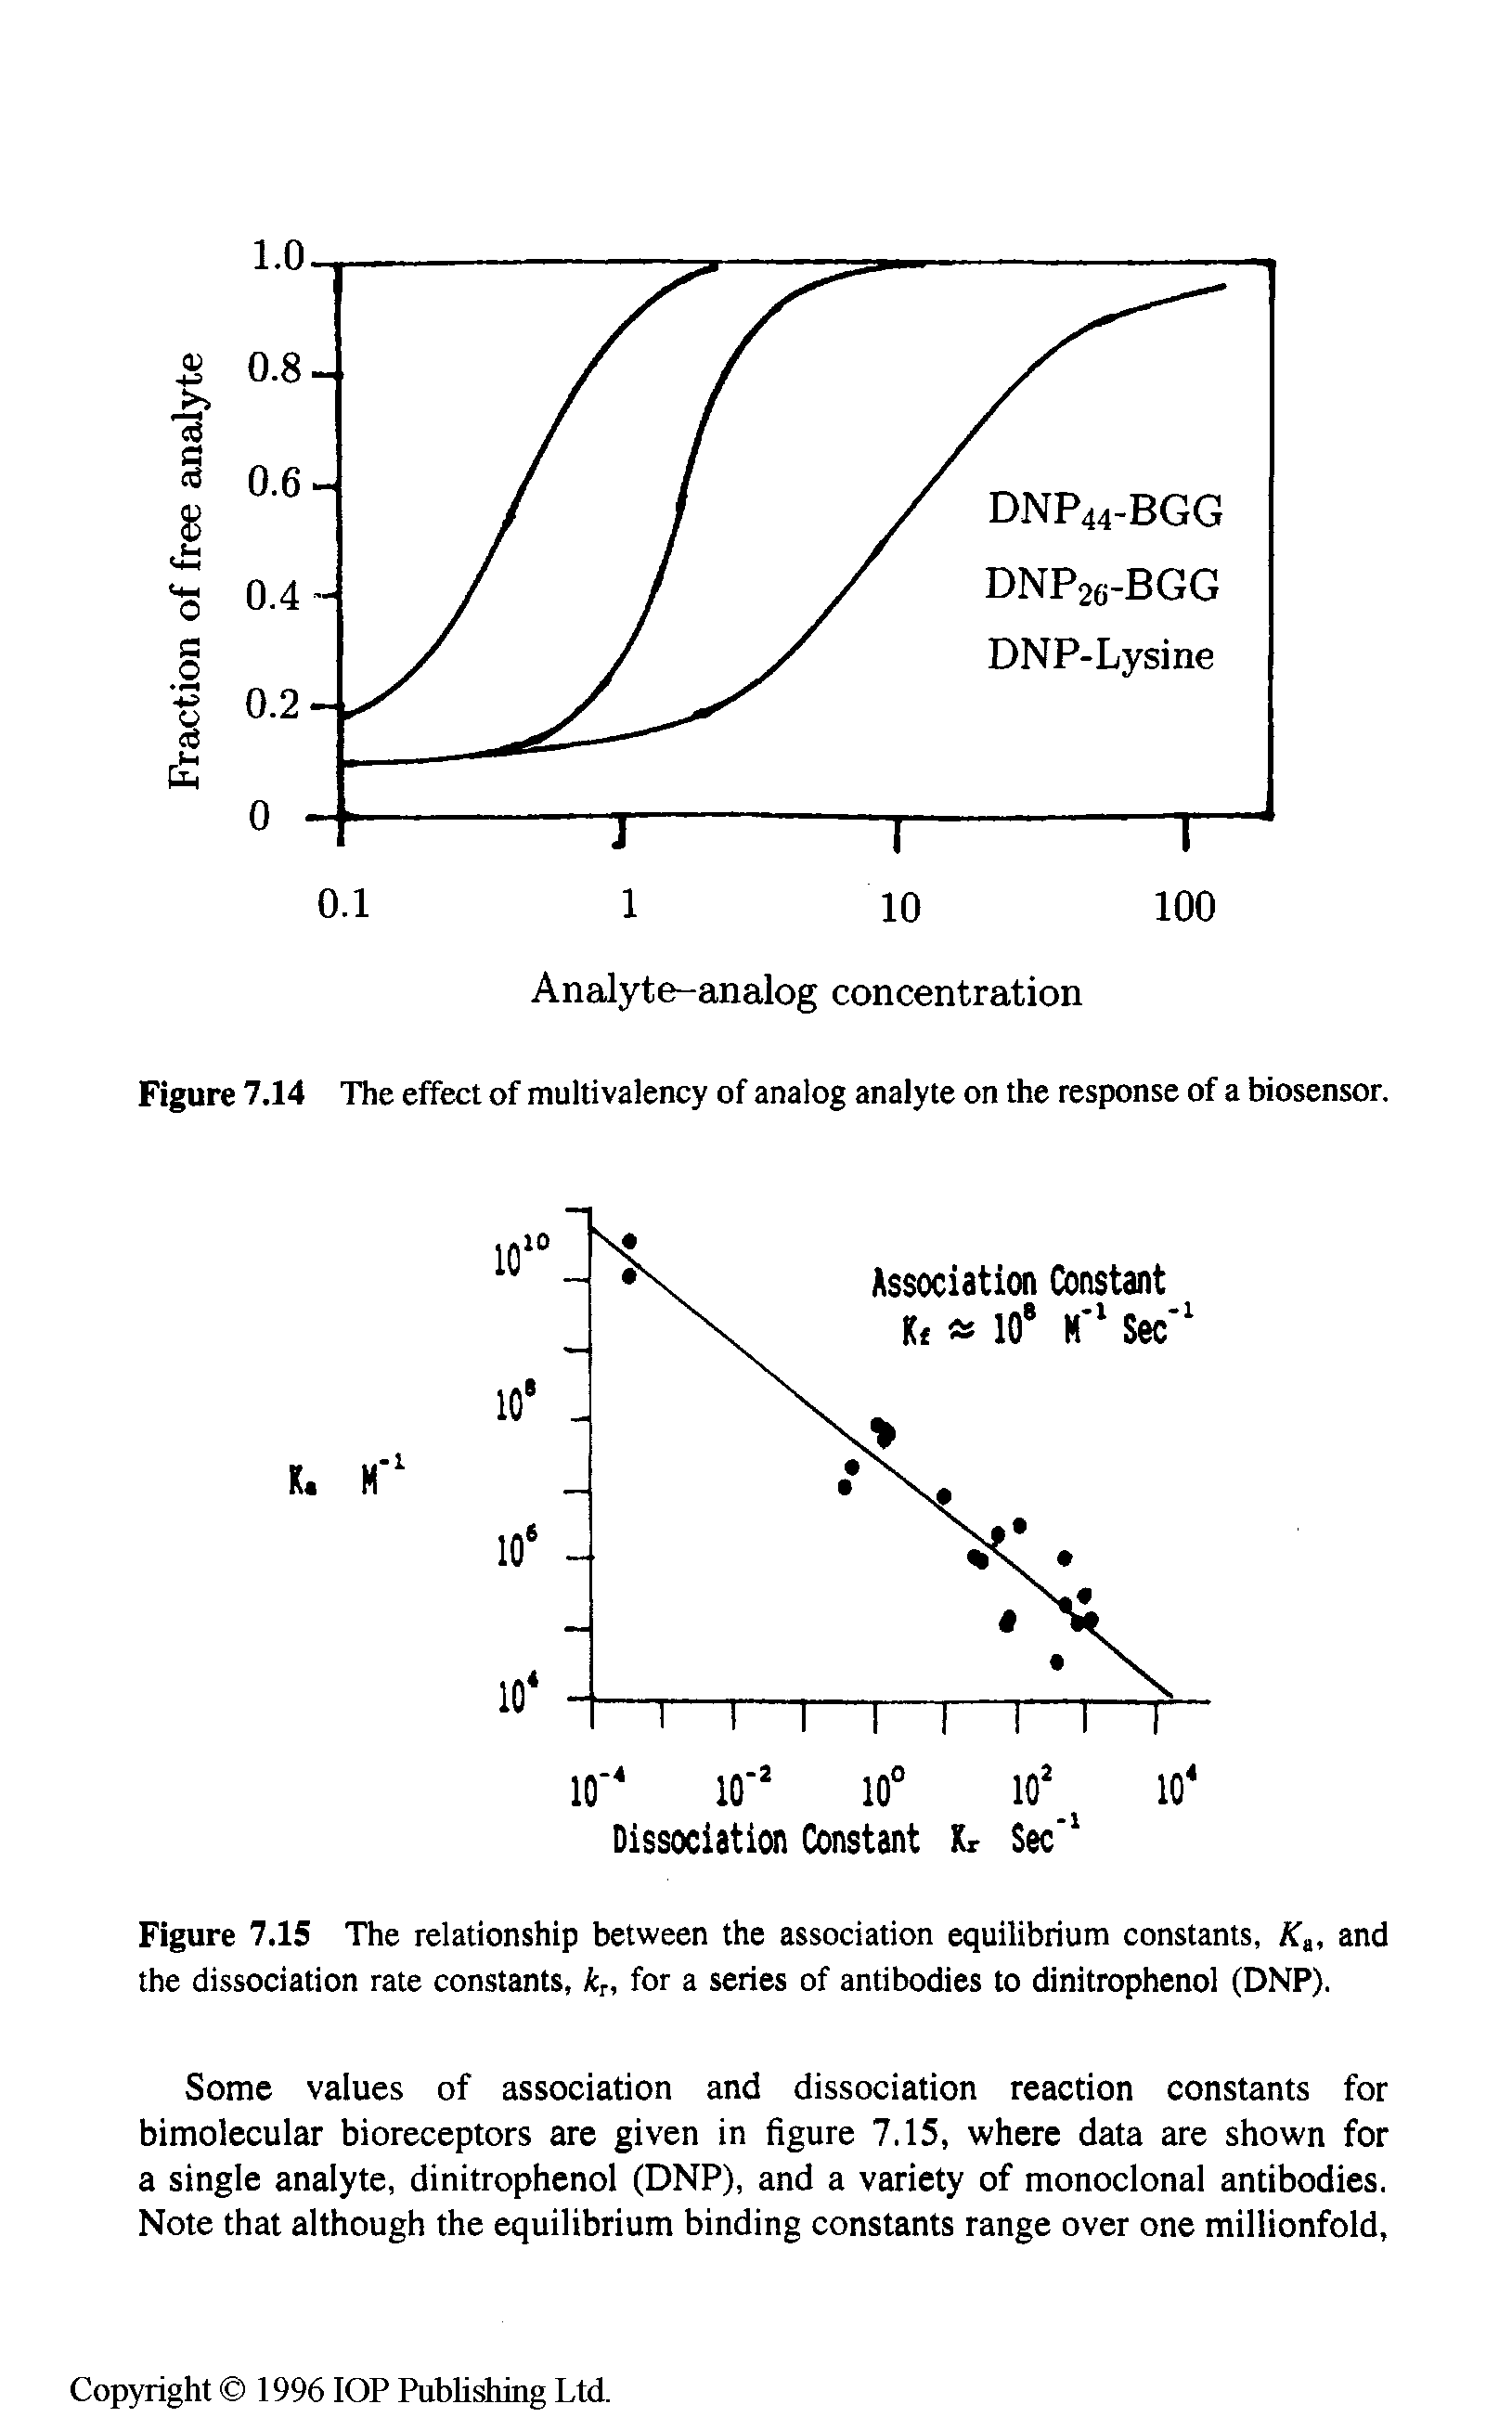 Figure 7.15 The relationship between the association equilibrium constants, K, and the dissociation rate constants, kr, for a series of antibodies to dinitrophenol (DNP).